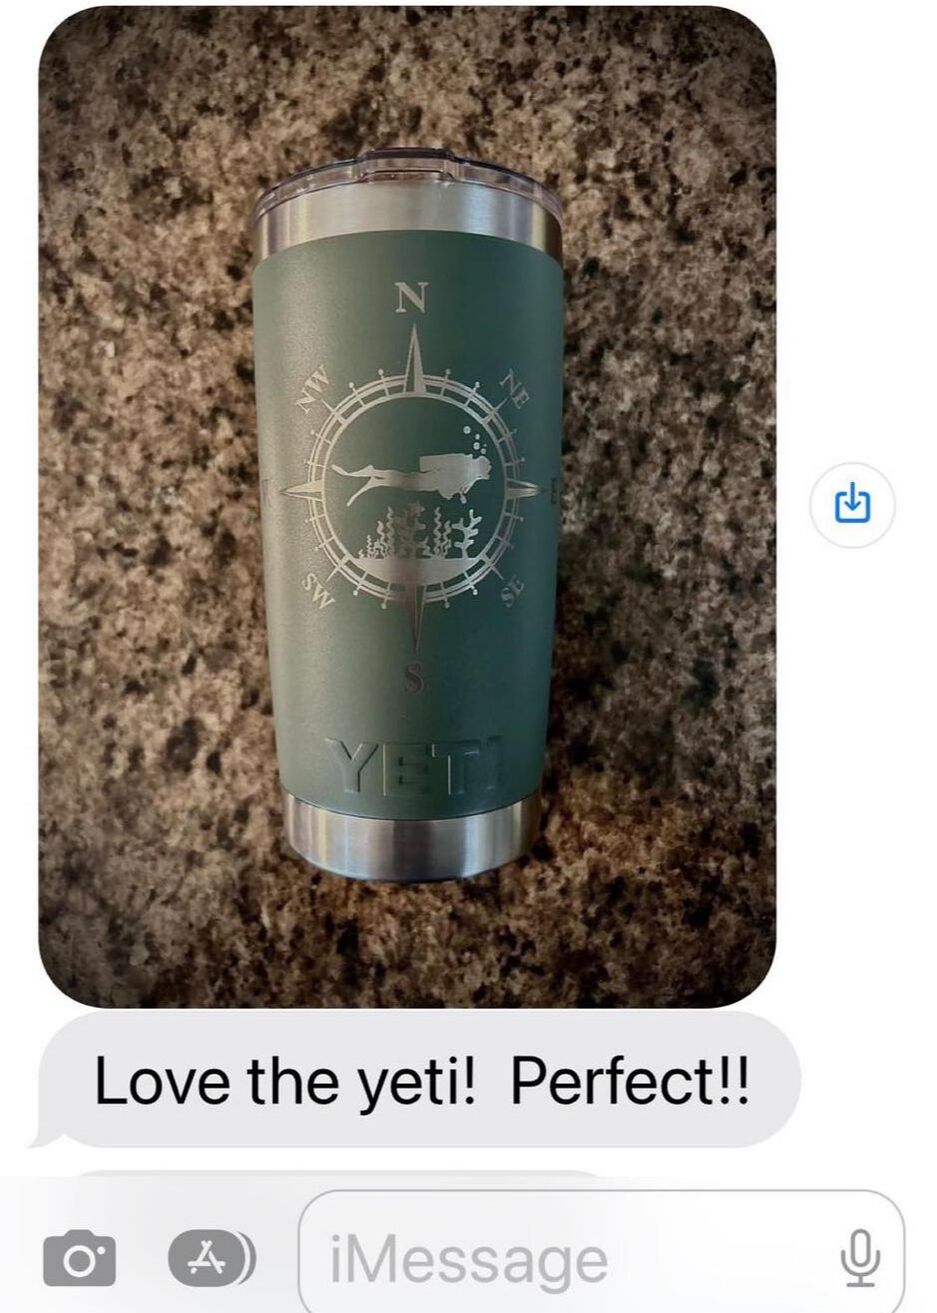 happy response to receiving an engraved Yeti